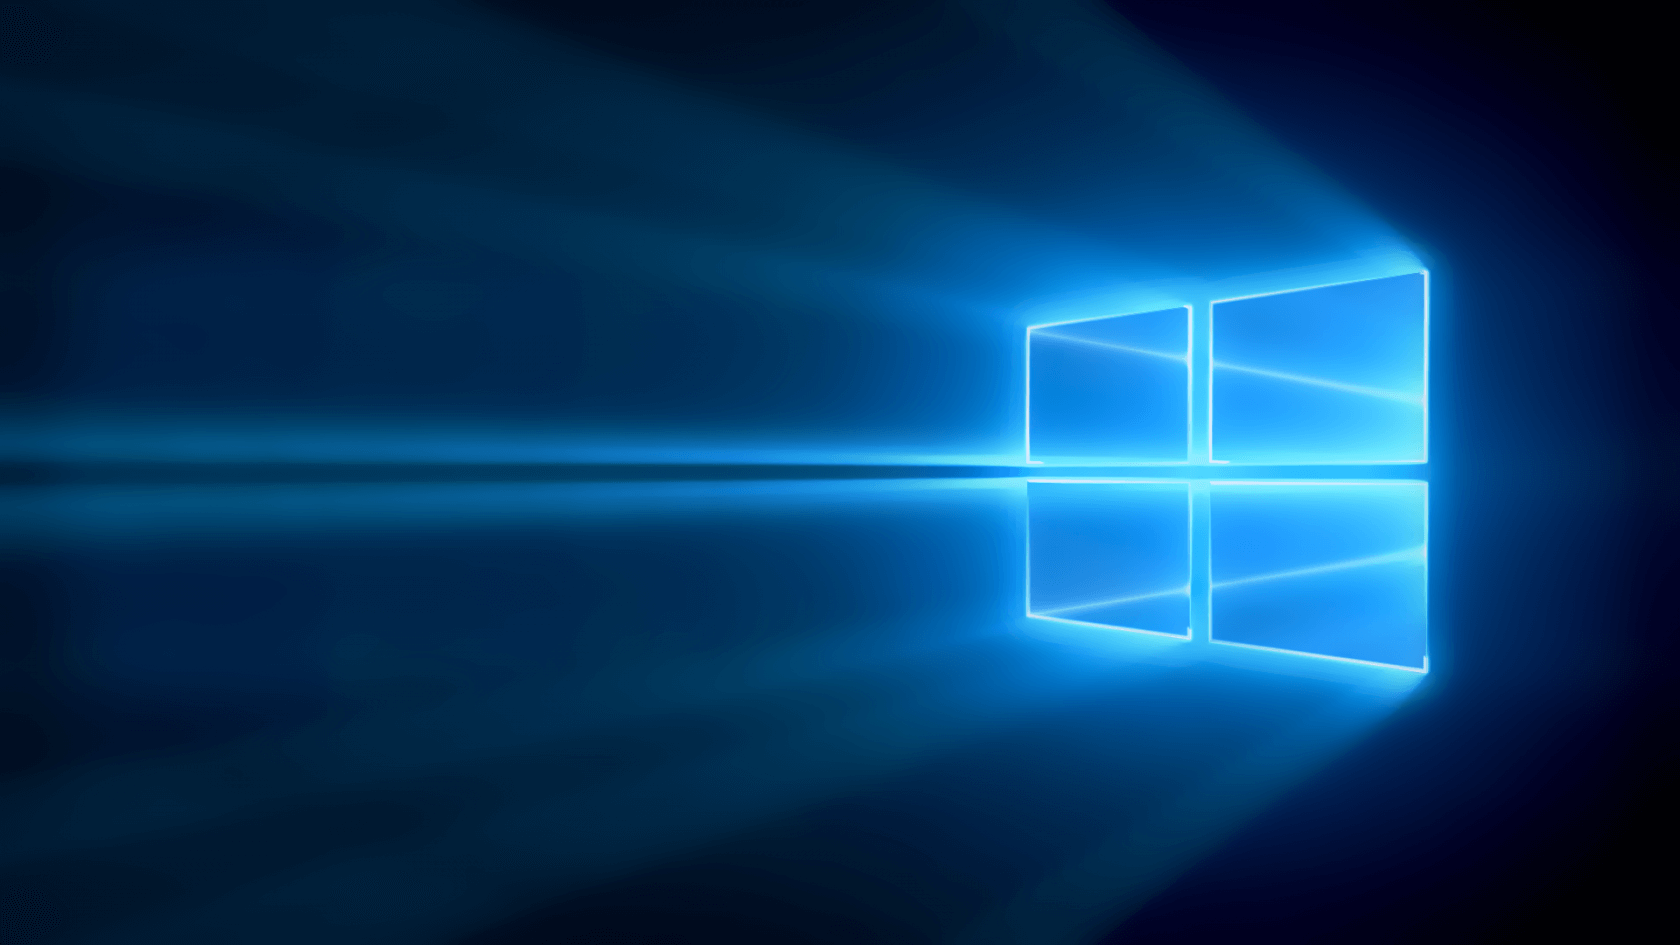 Microsoft will soon let you delay Windows 10 updates for up to 35 days